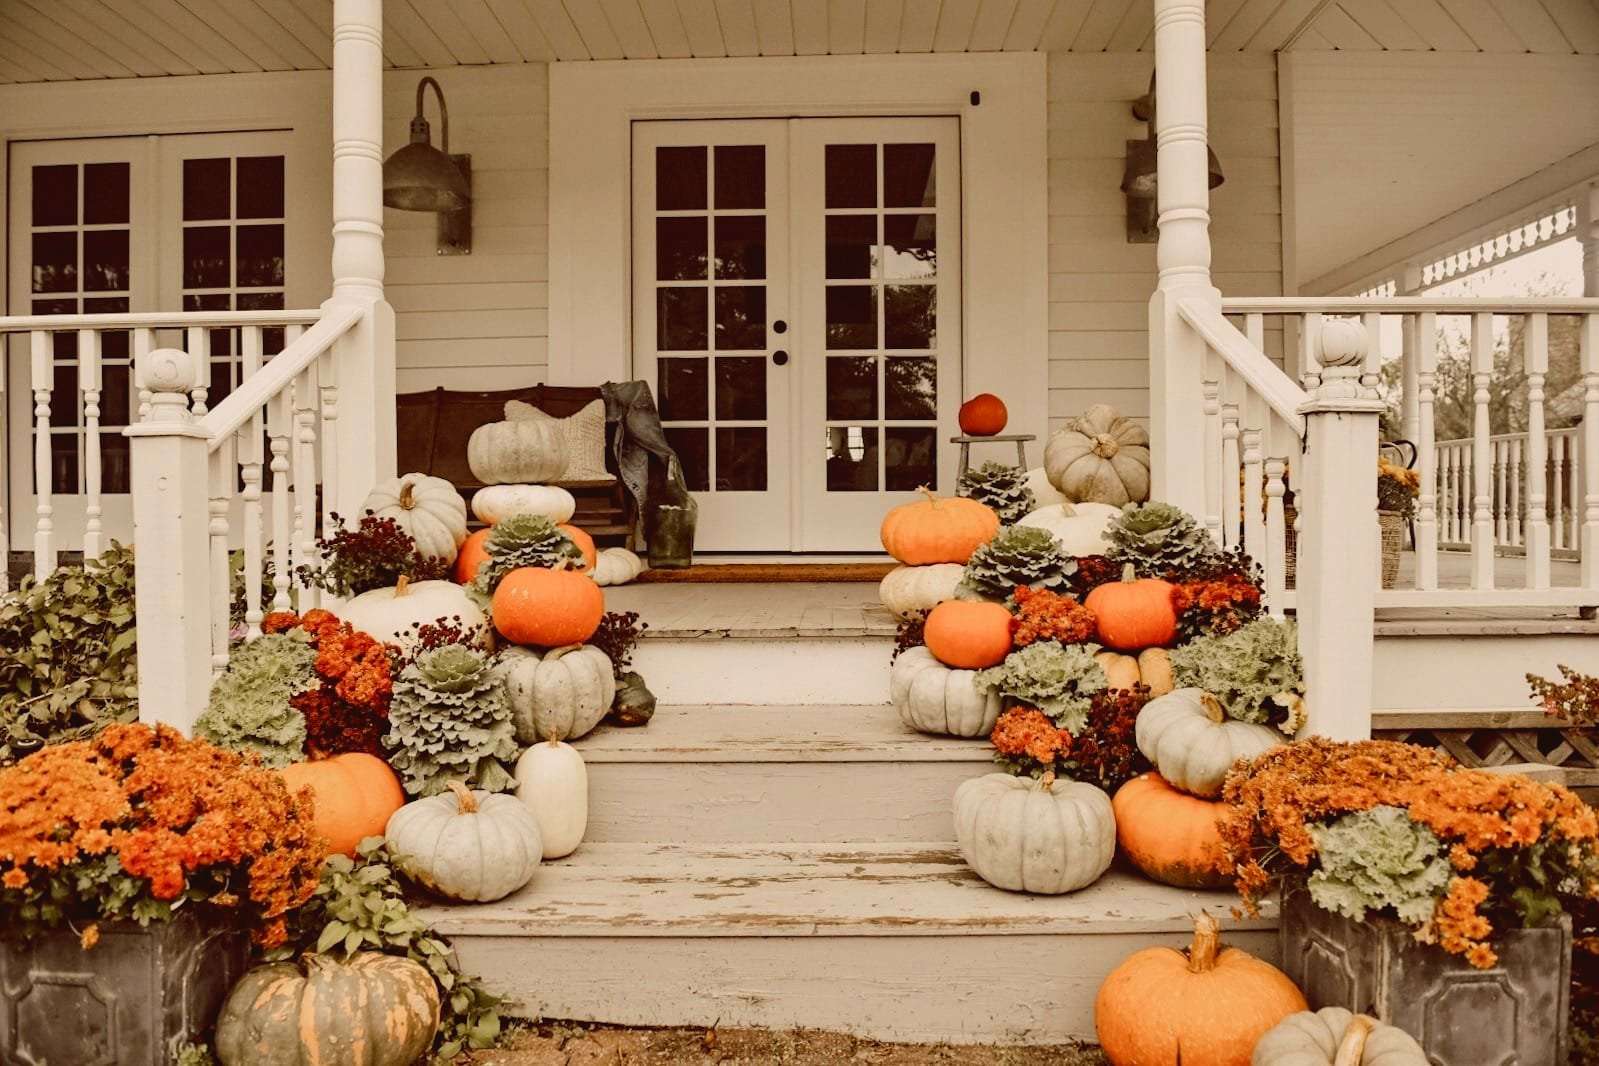 Autumn decoration in front of the door jigsaw puzzle online